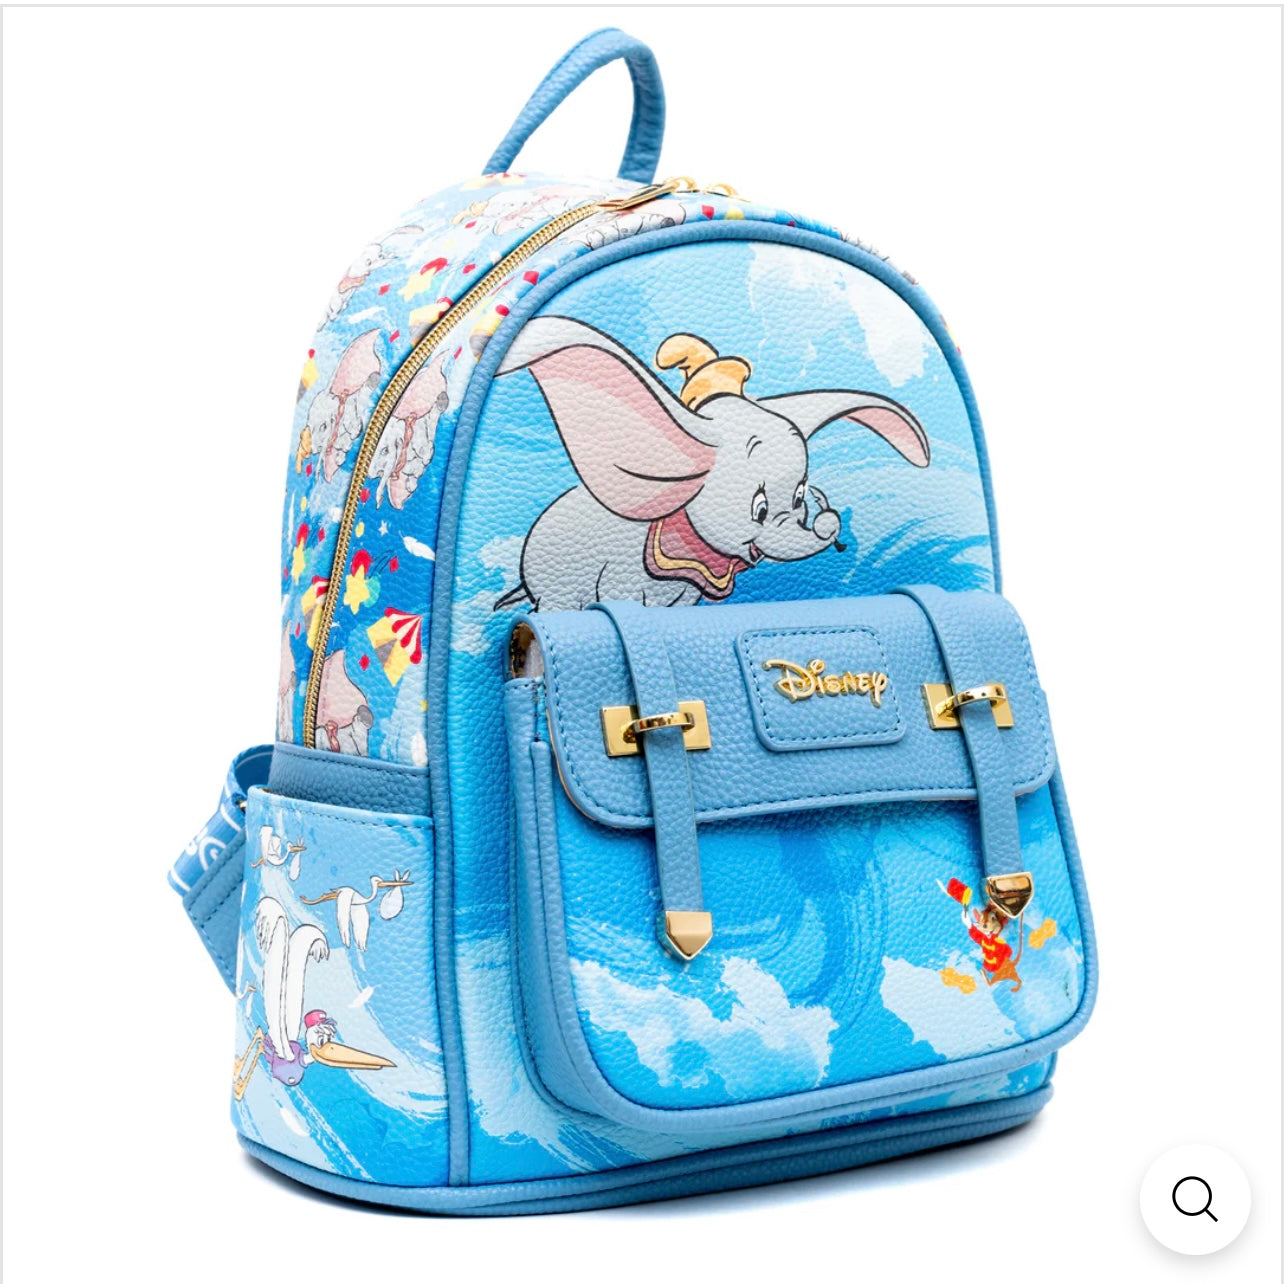 Exclusive Limited Edition-Dumbo Vegan Leather Backpack